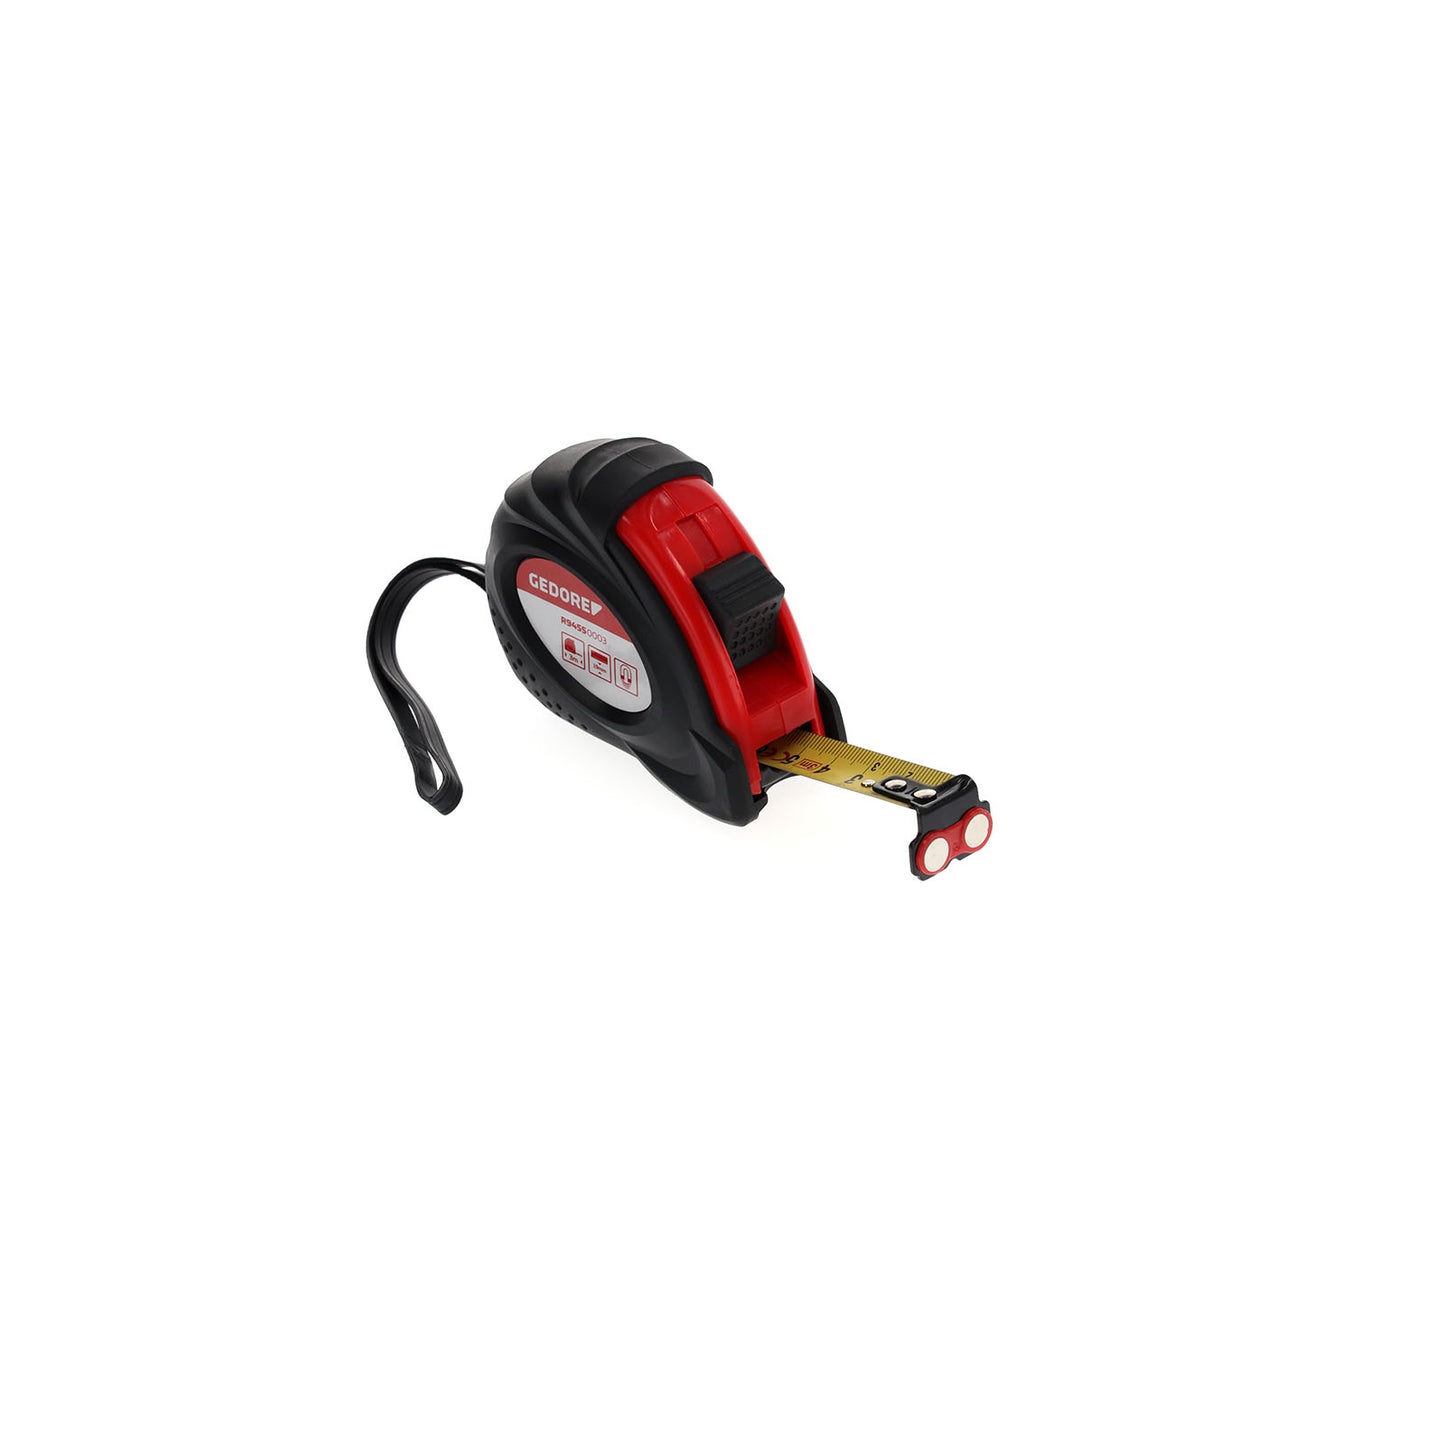 GEDORE red R94550003 - 3m tape measure (3301427)